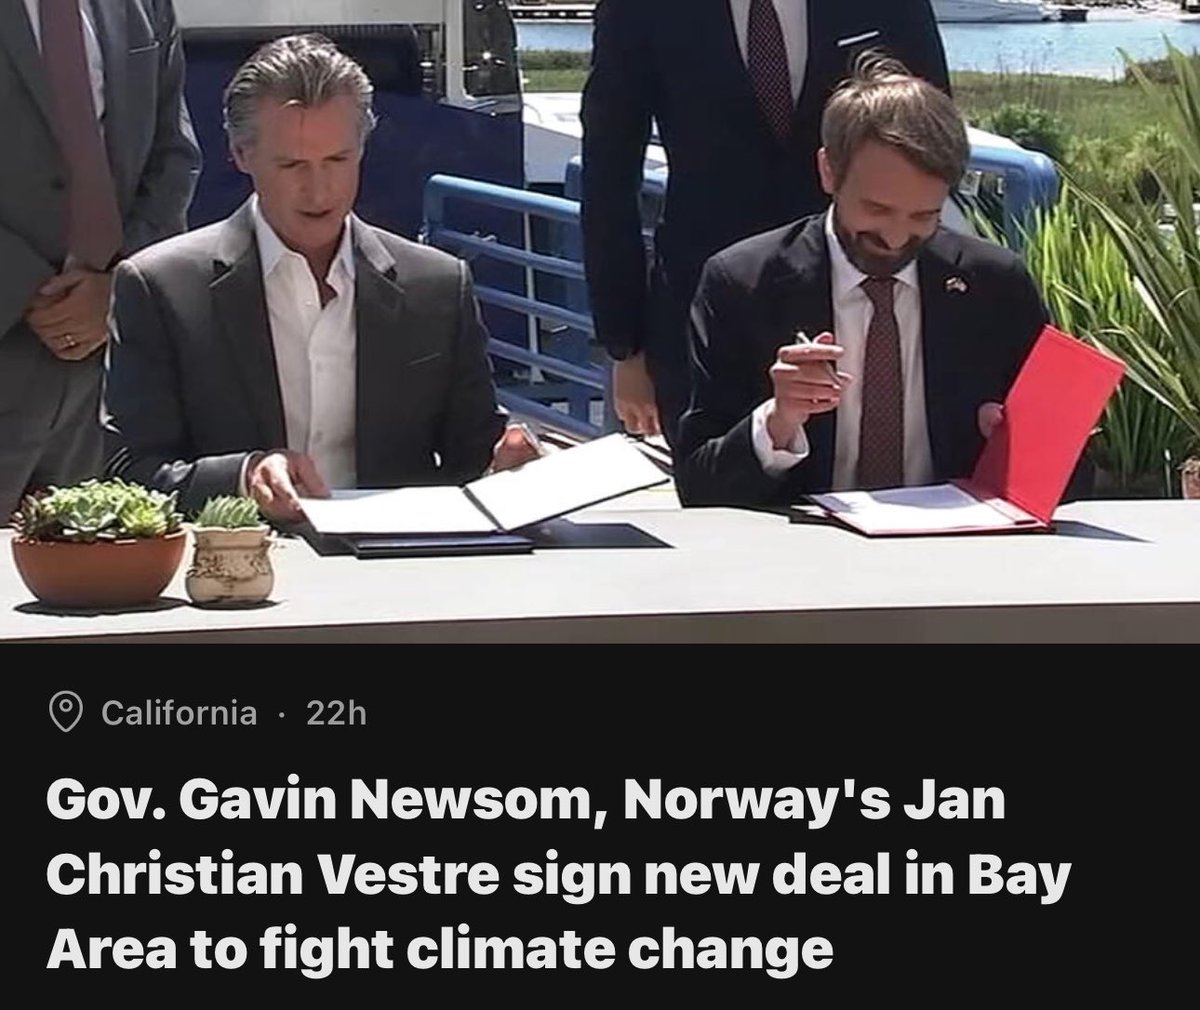 Fuck Newscum and fuck climate change.